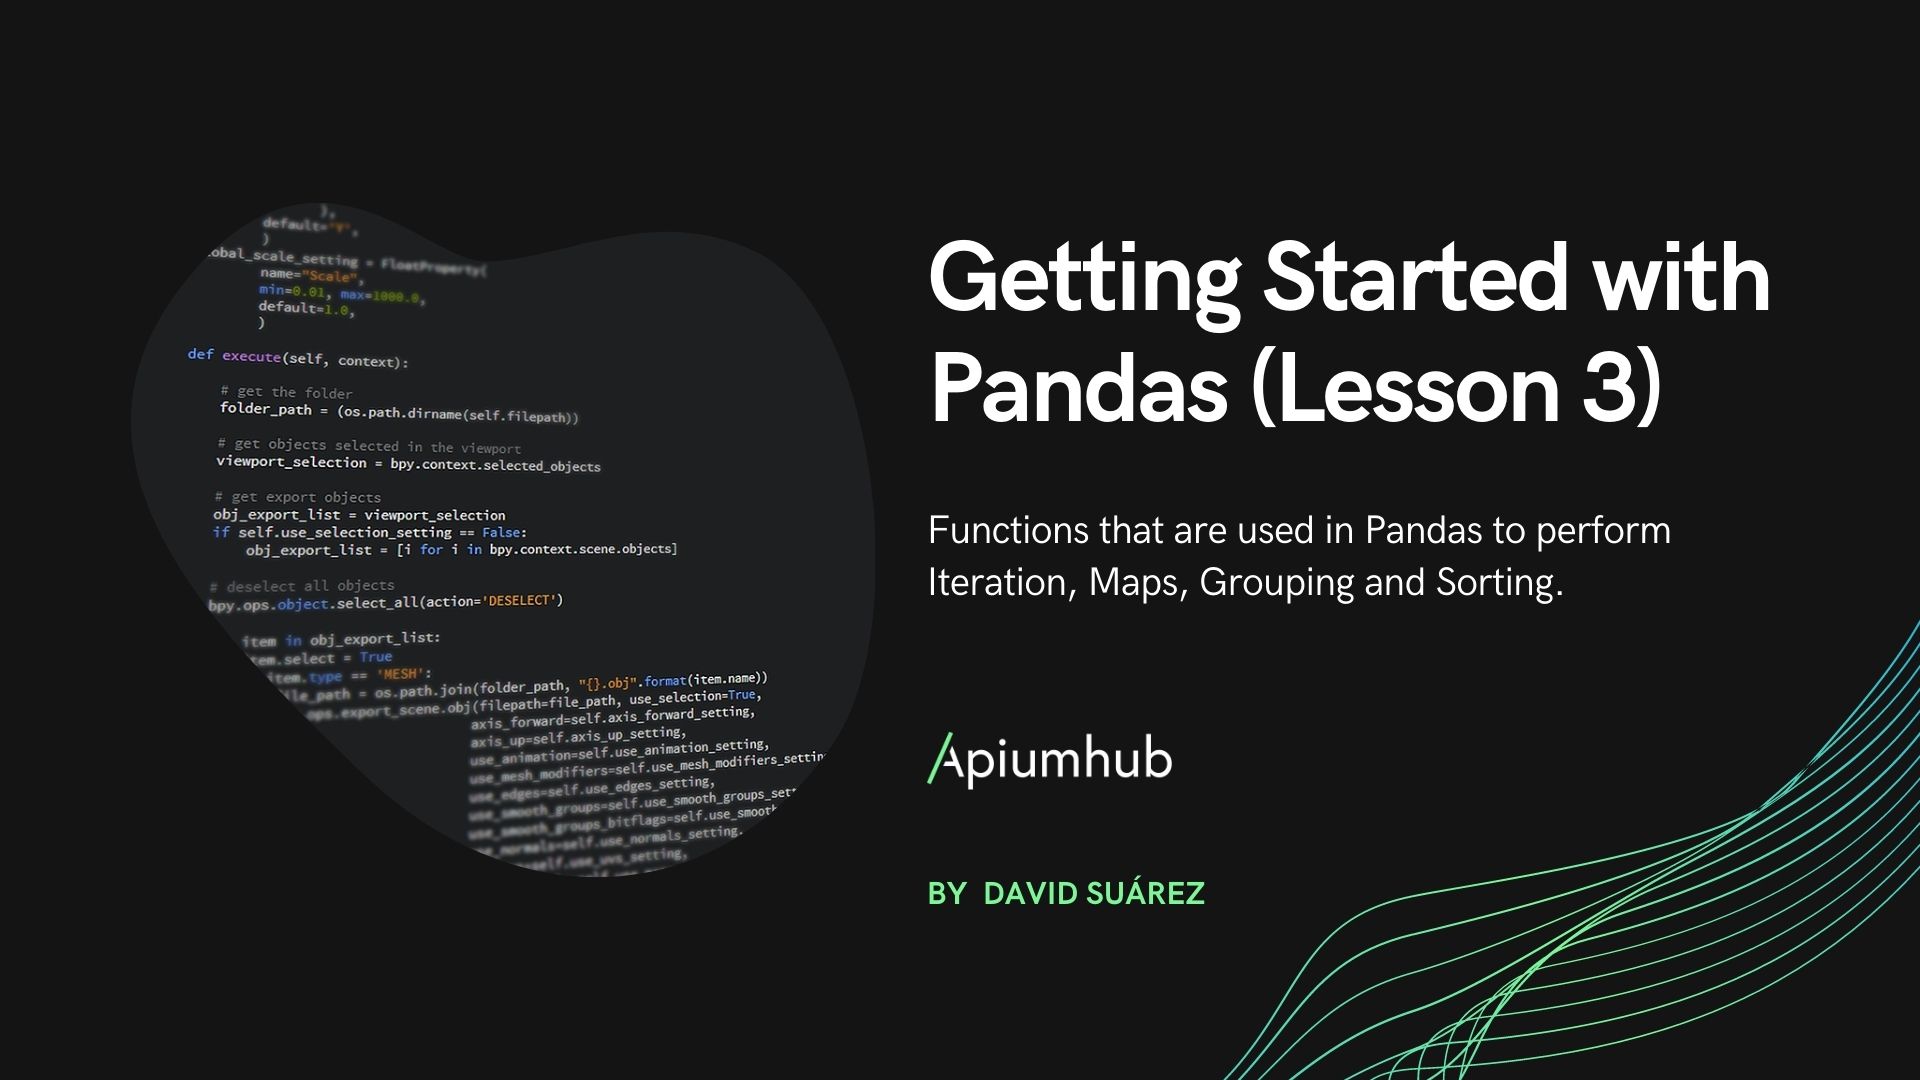 Getting Started with Pandas – Lesson 3